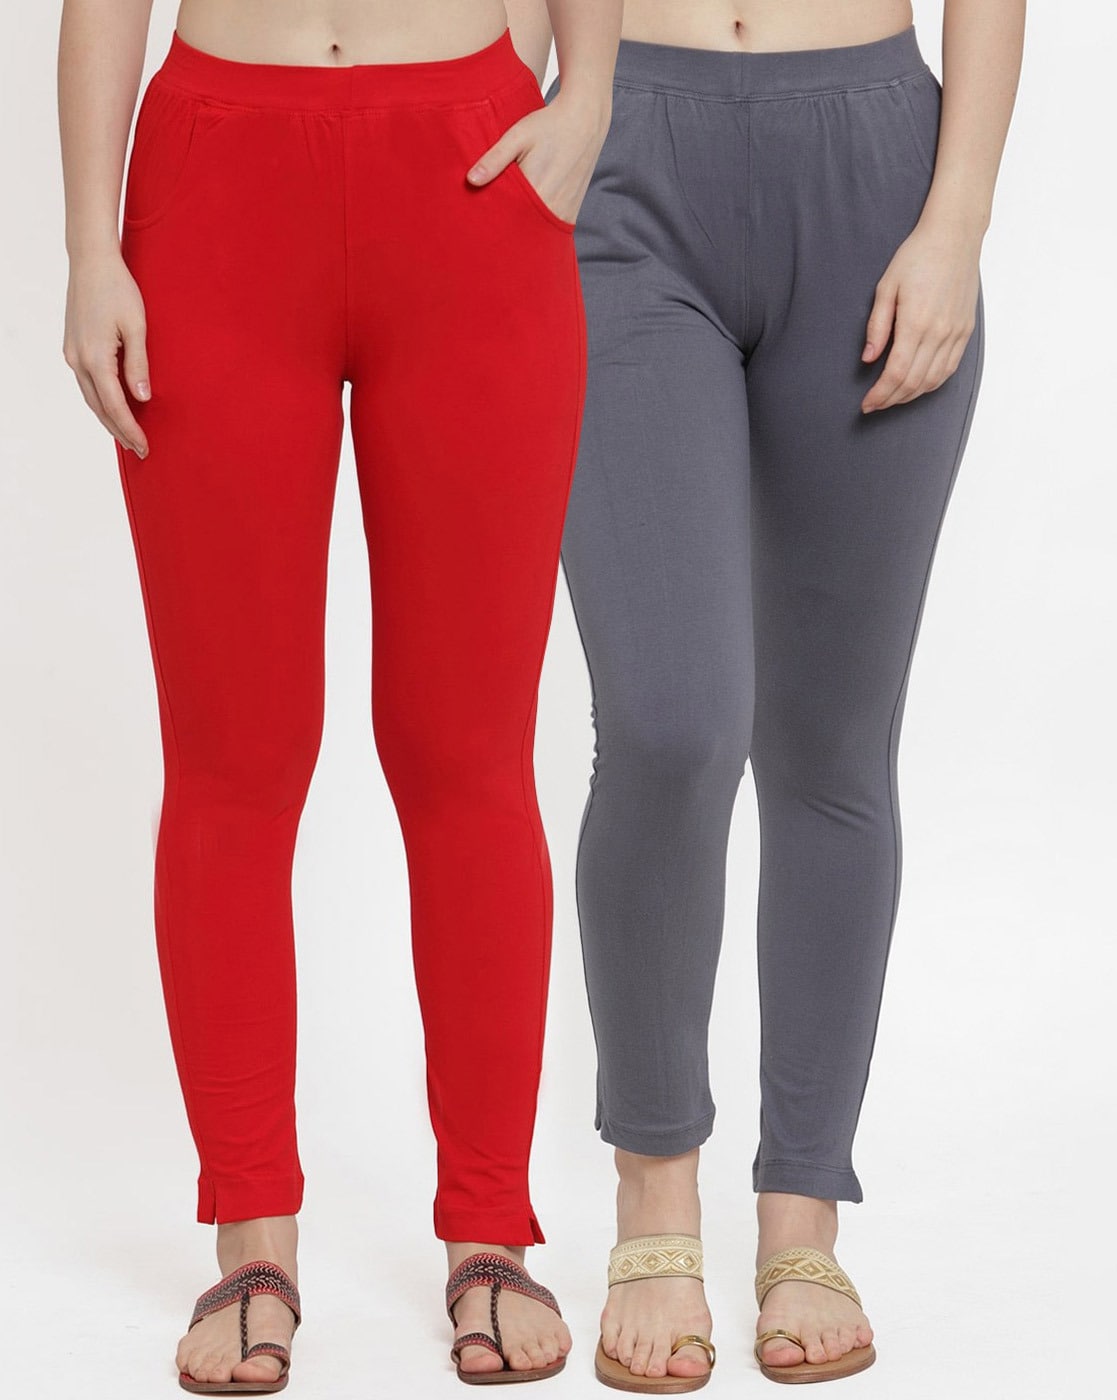 Buy Red Leggings for Women by Tag 7 Plus Online